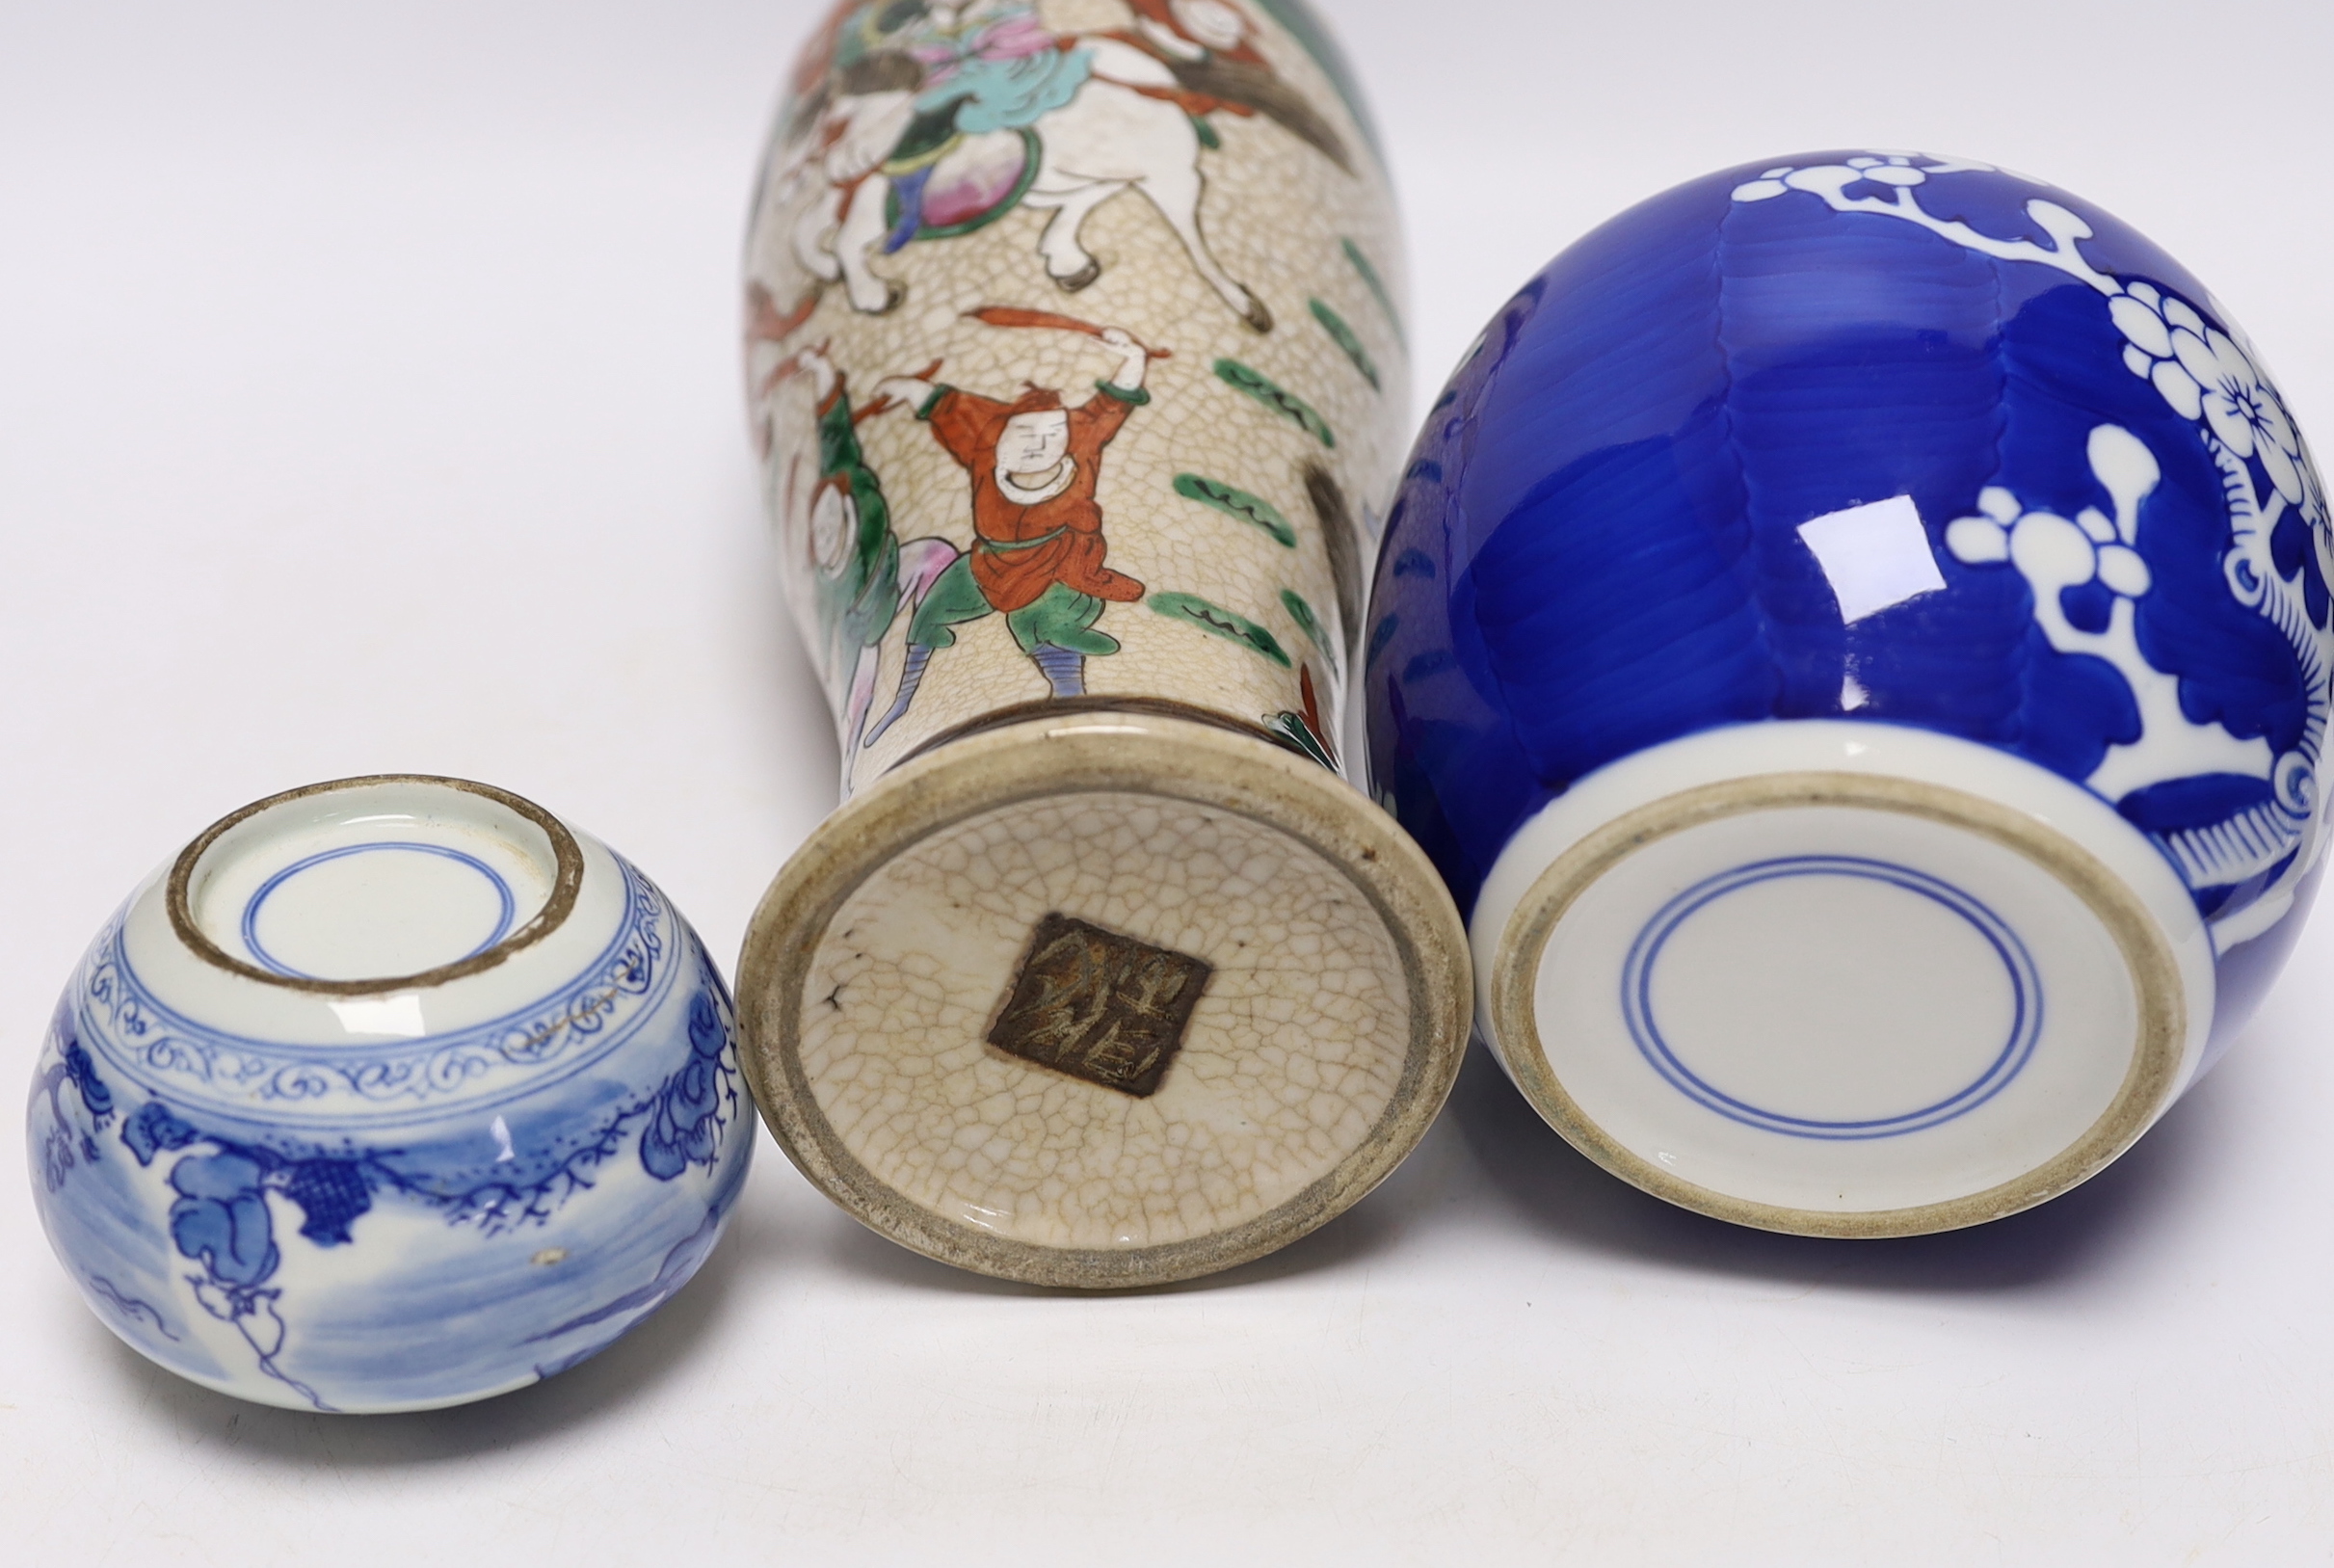 An early 20th century Chinese crackle glaze vase and two blue and white jars, largest 30cm high